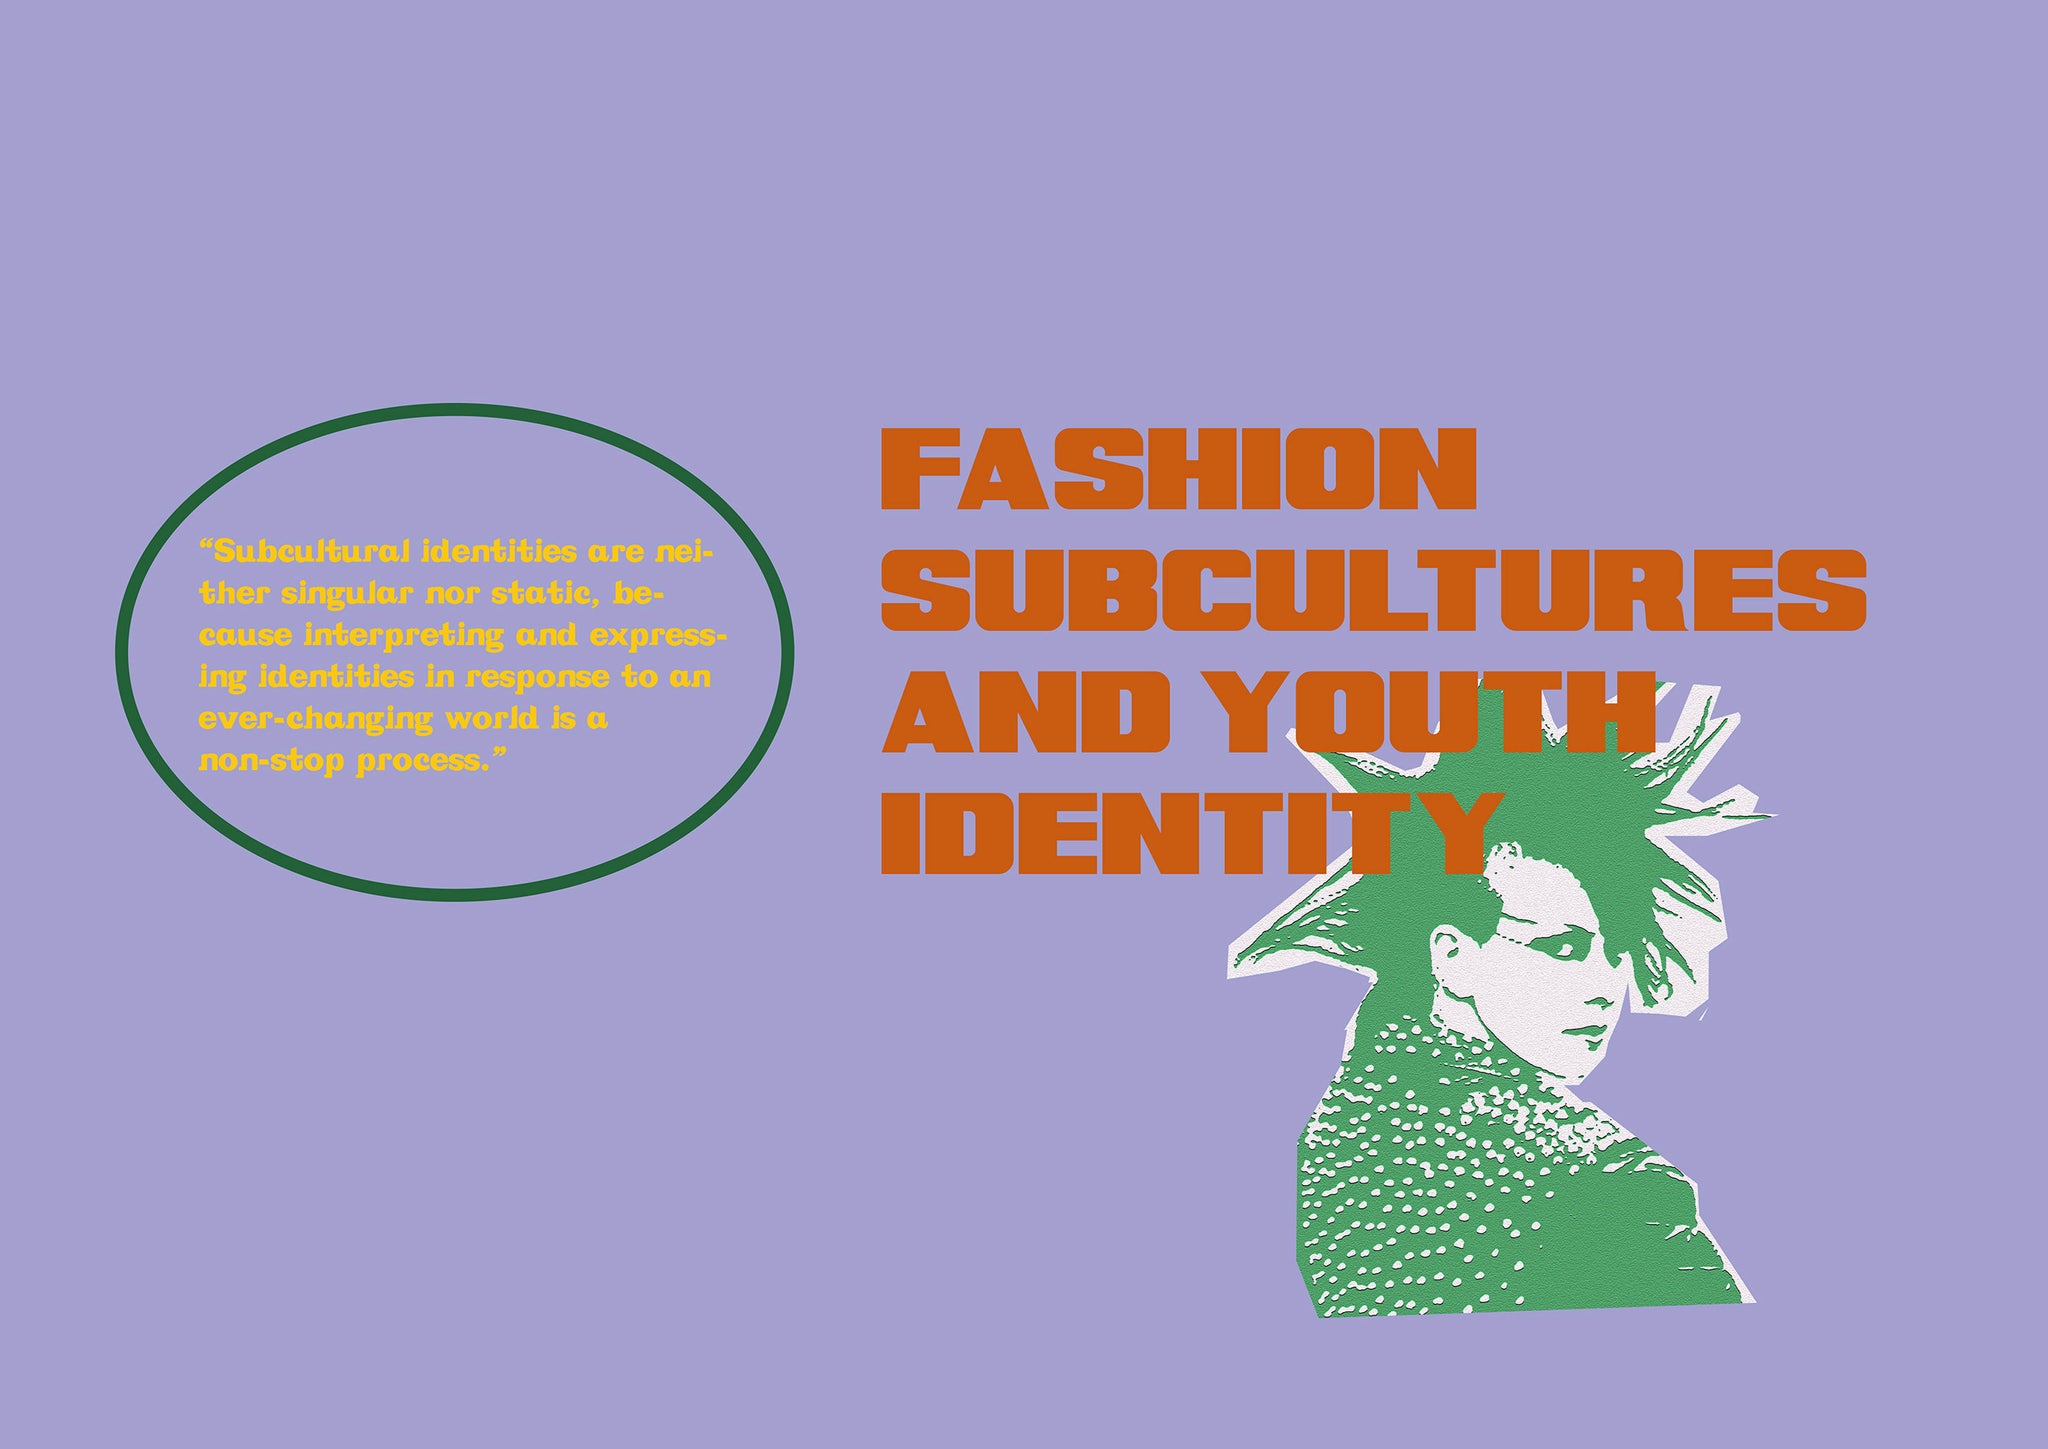 Fashion subcultures and youth identity